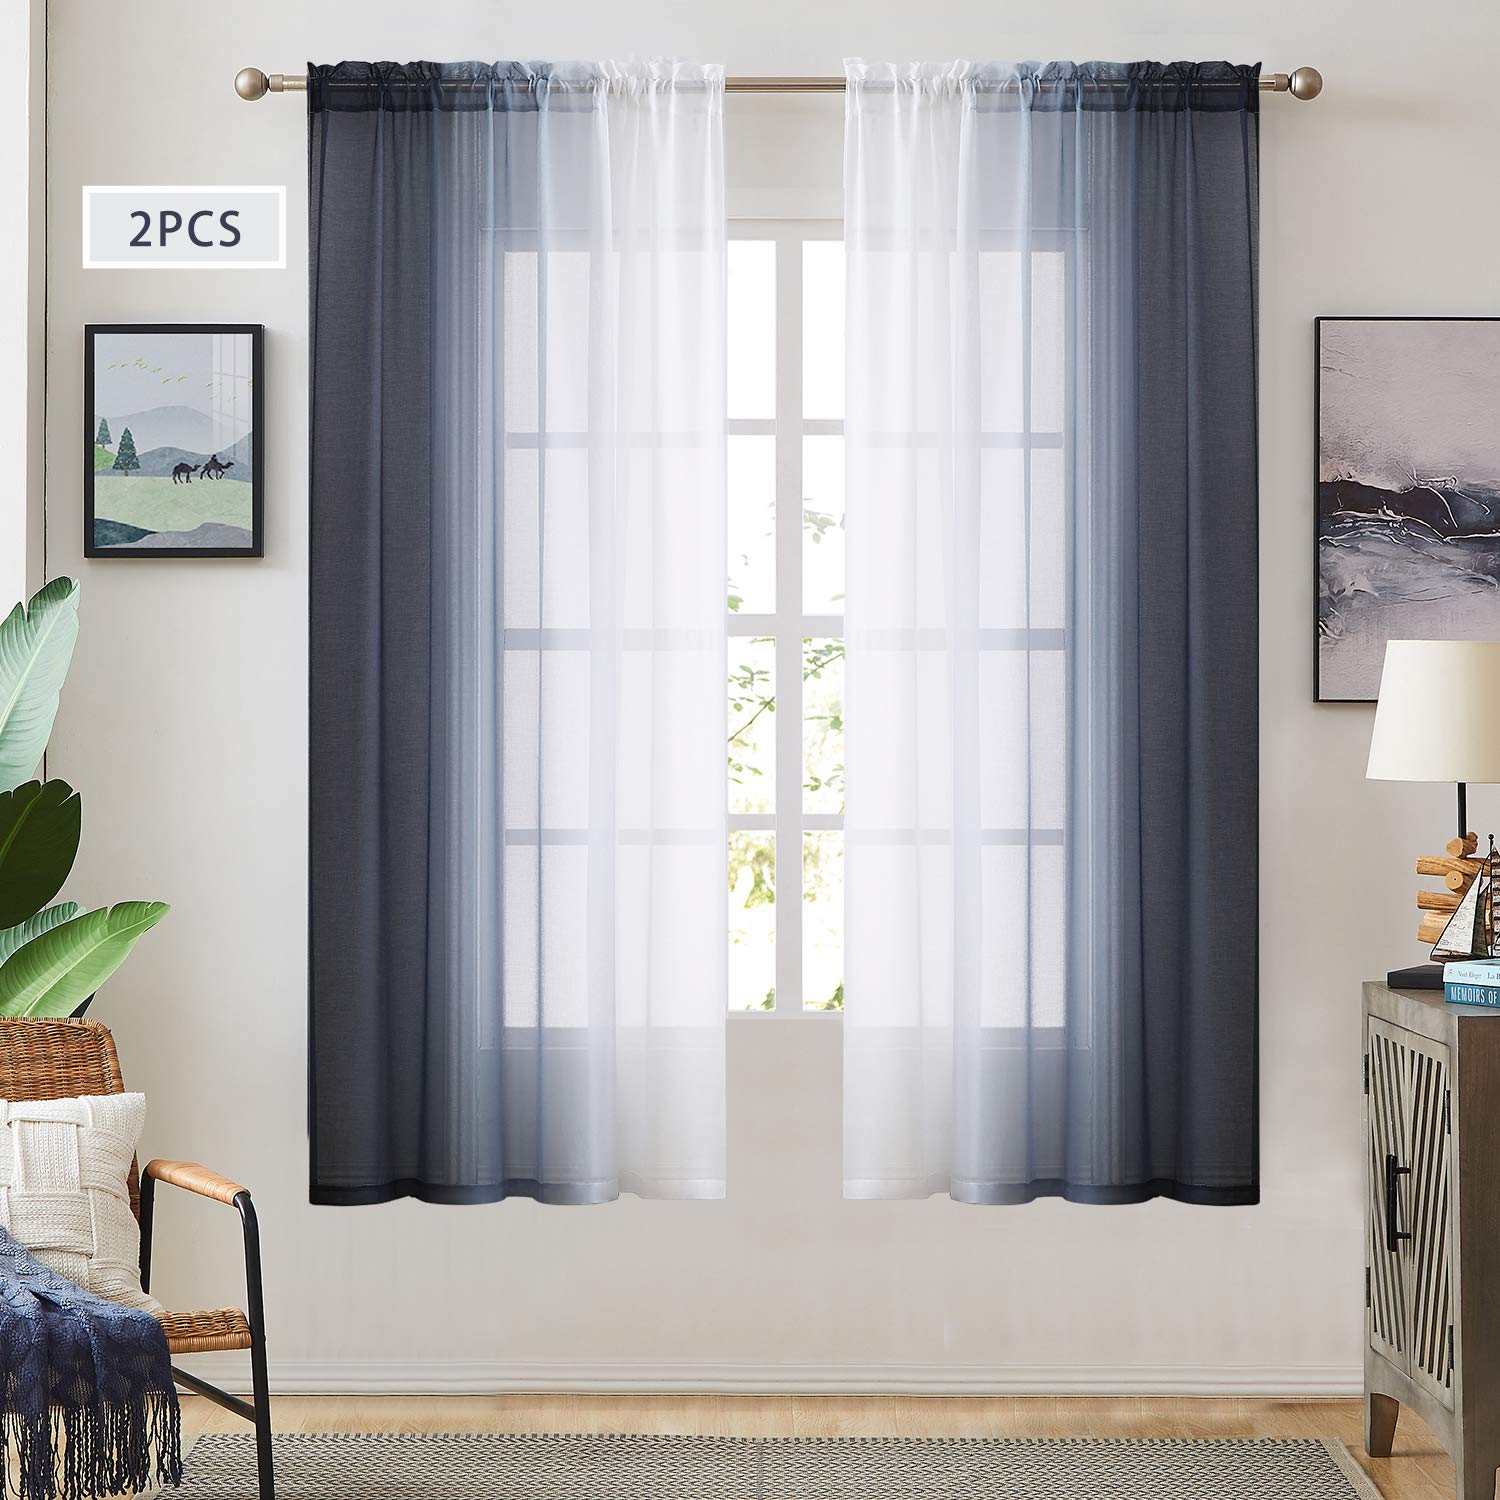 Dark Grey Ombre Faux Linen Sheer Curtains for Bedroom Living Room Rod Pocket, 2 Tone Reversible Gradient Voile Semi Window Curtains,Privacy and Light Filtering, Set of 2 Panels, 54 x 63 Inch Length